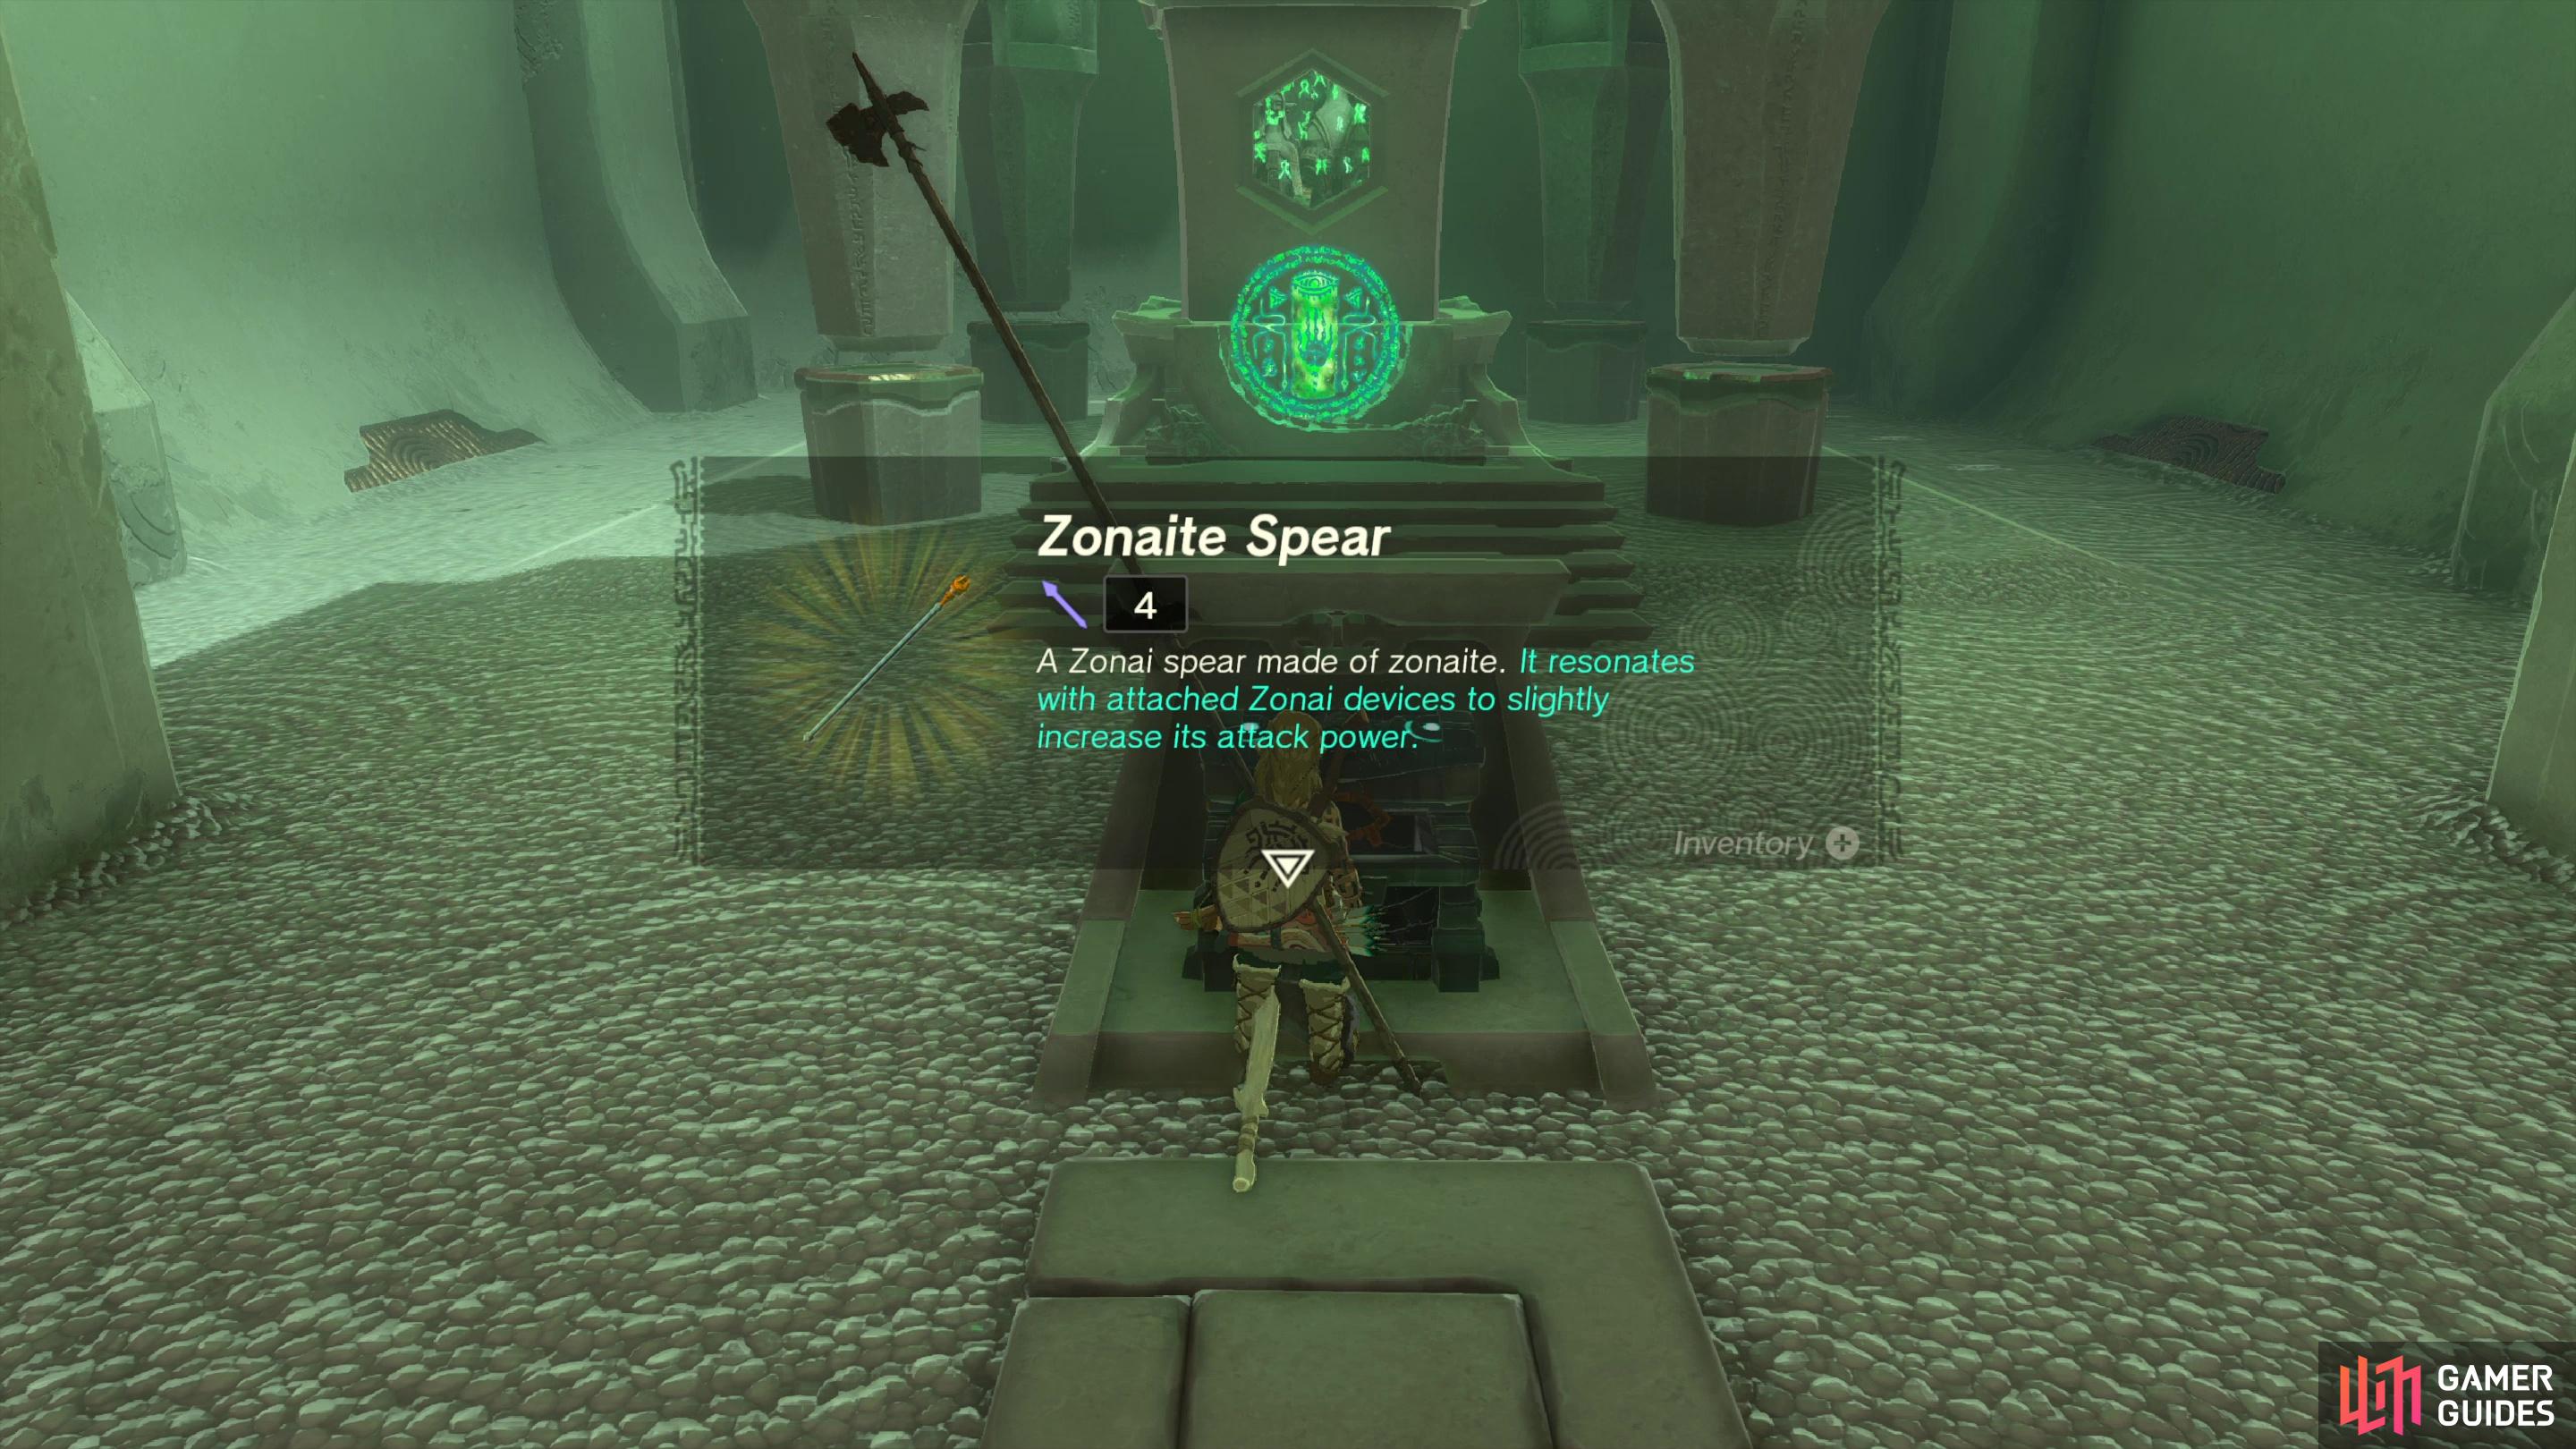 Along with the standard Light of Blessing, you’ll obtain a Zonaite Spear for completing this shrine.